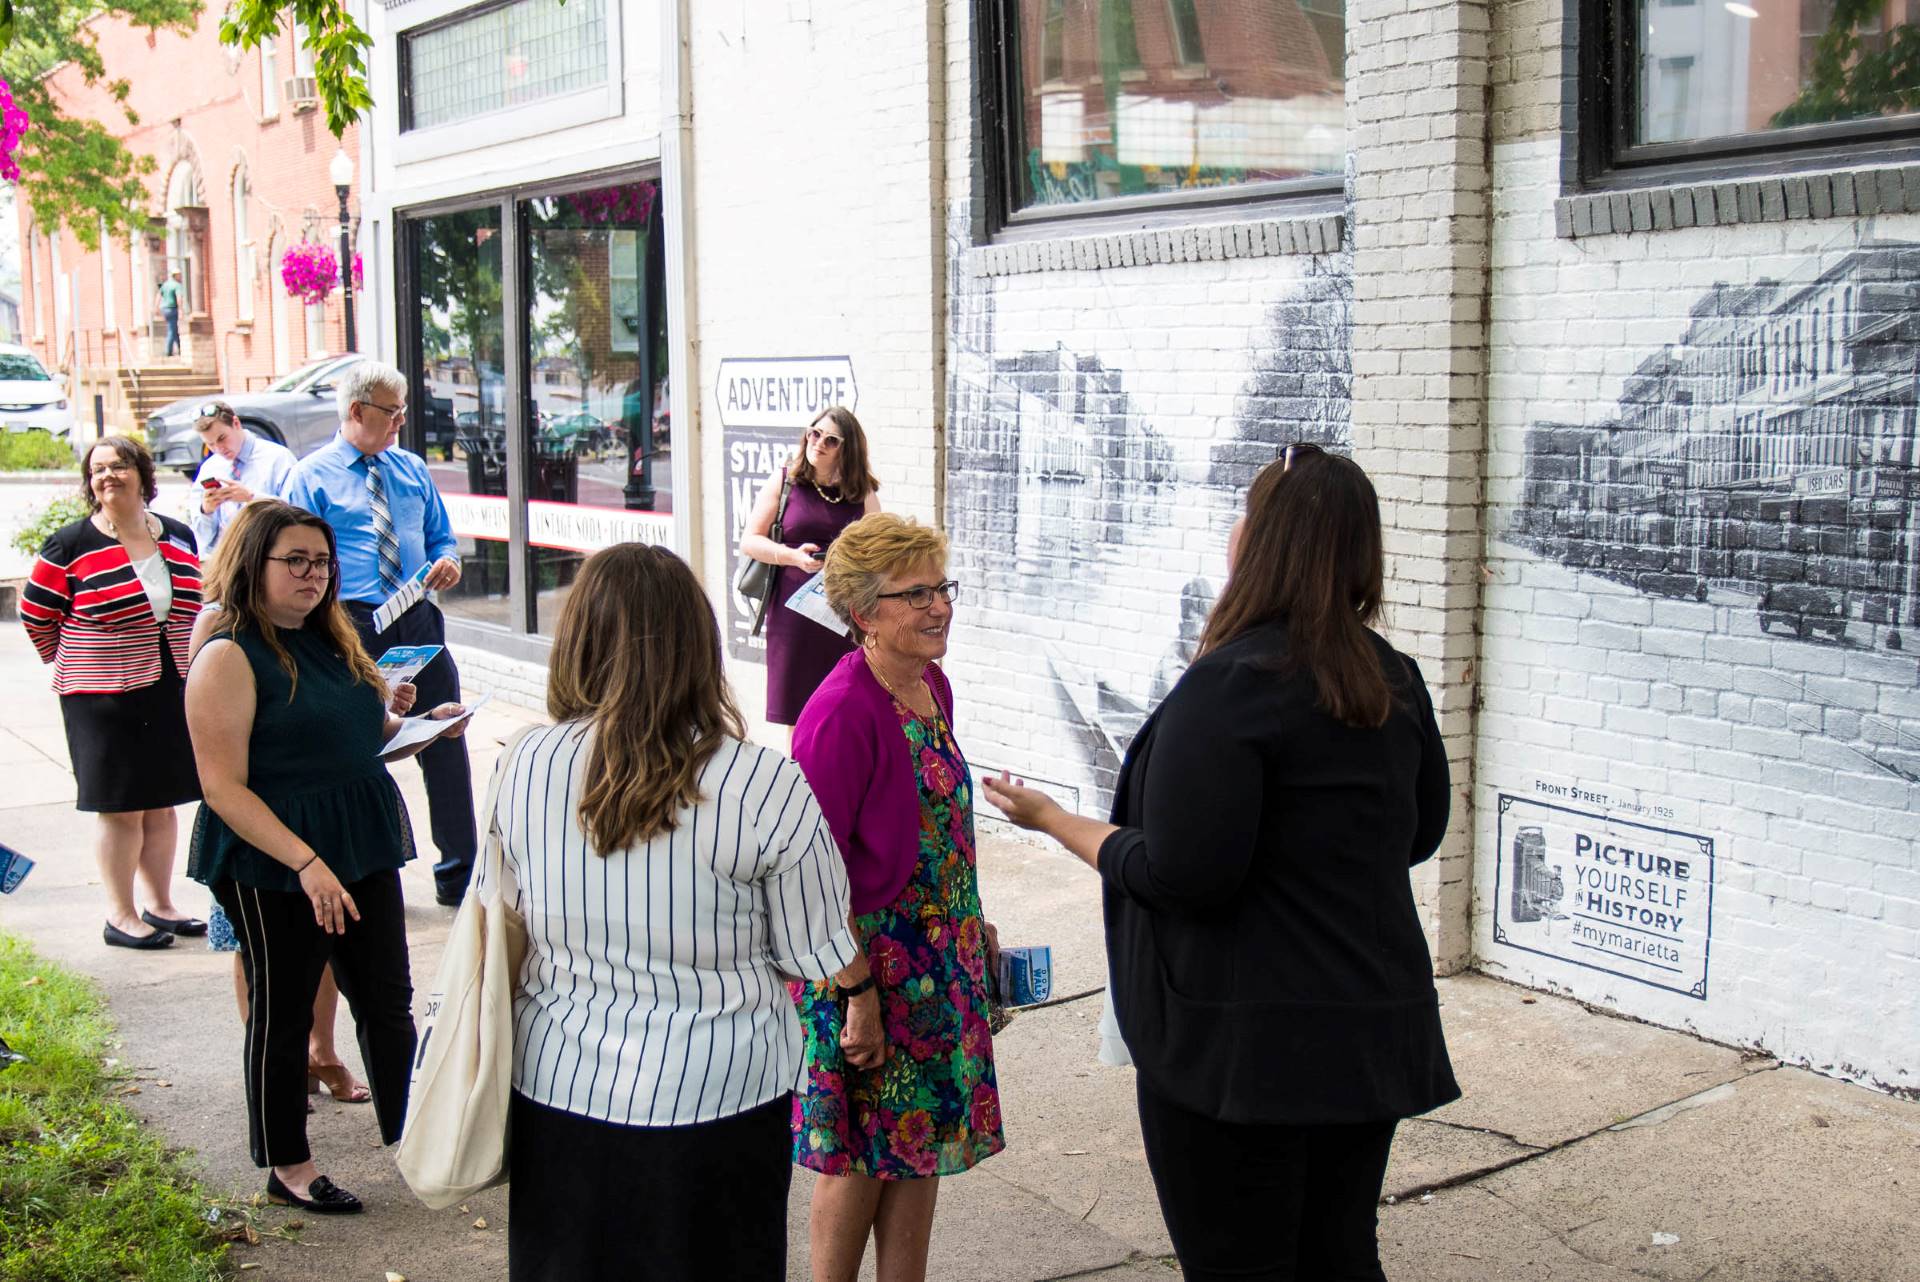 BHRC leadership walk through historic downtown in Southeast Ohio